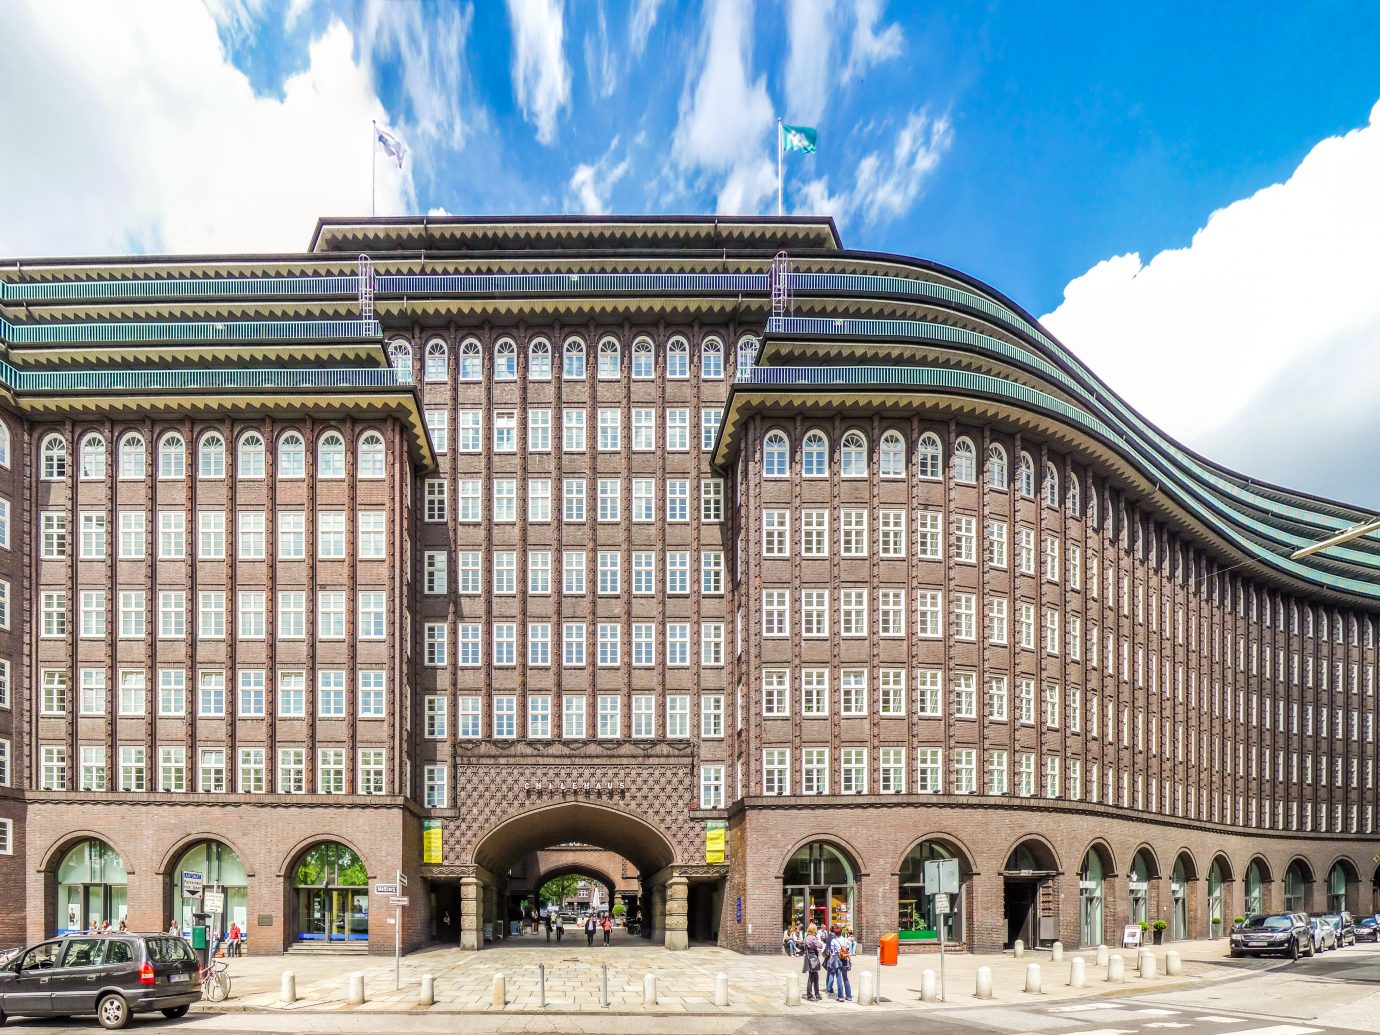 Wide angle view of famous Chilehaus